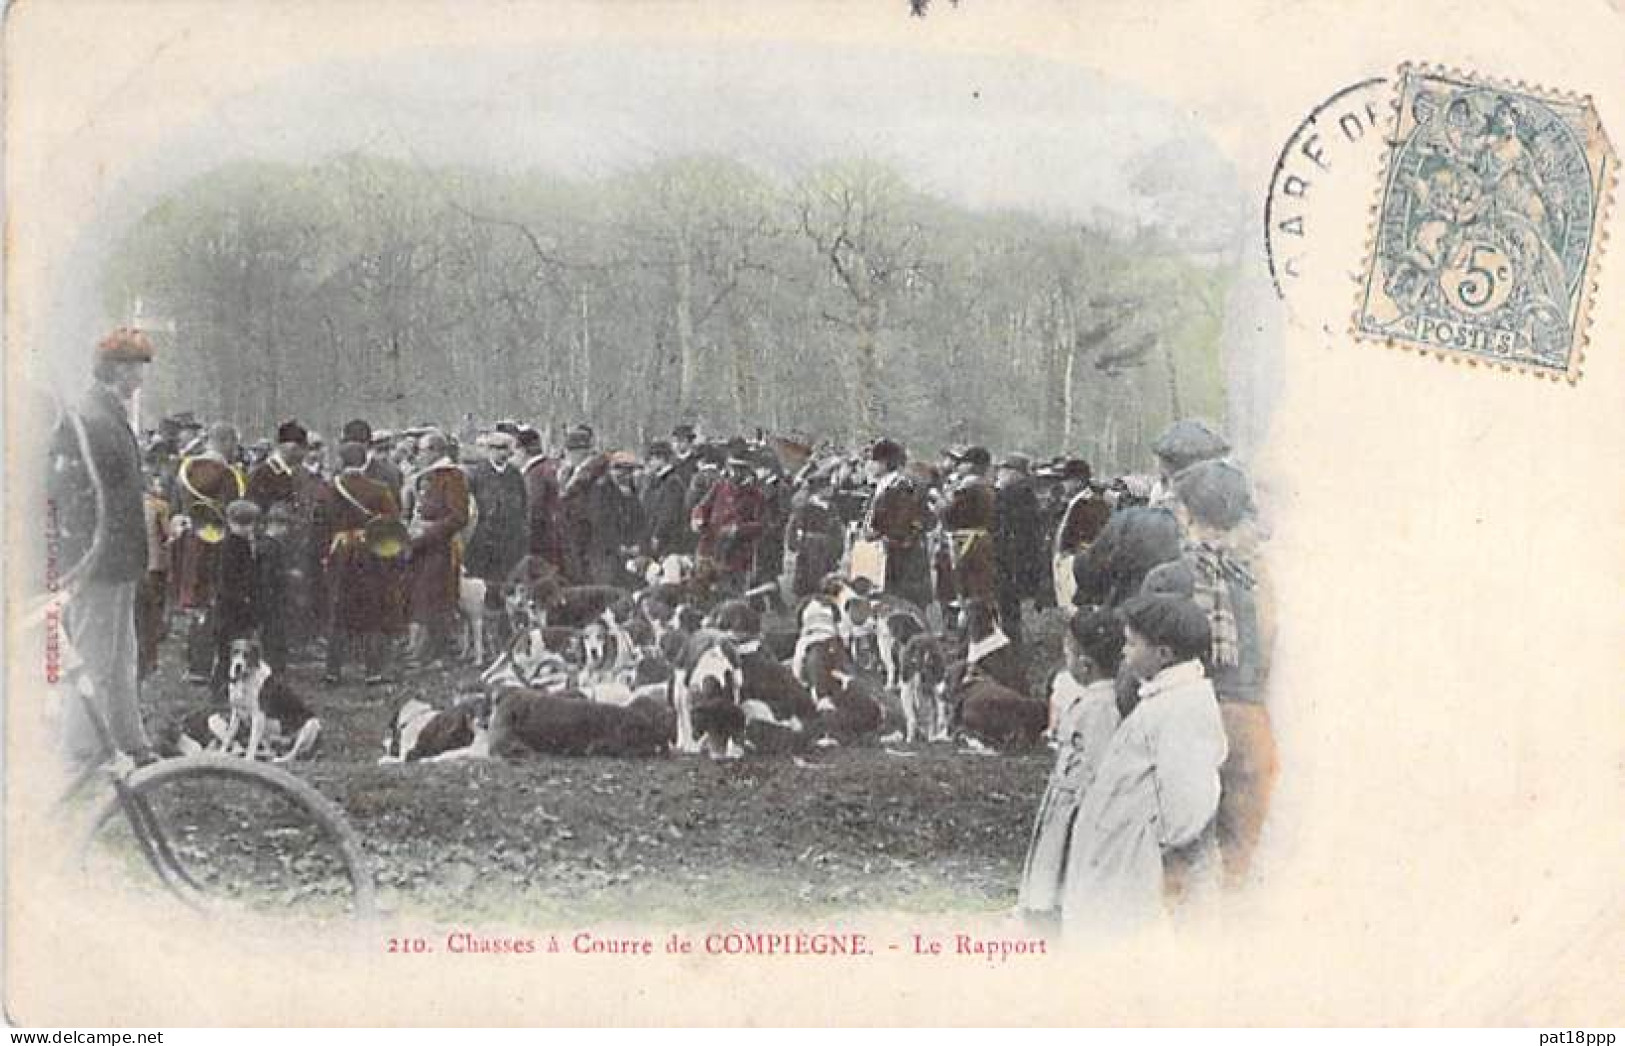 SPORT - CHASSE A COURRE - 60 - COMPIEGNE : Le Rapport - CPA Colorisée - Oise - Chasse